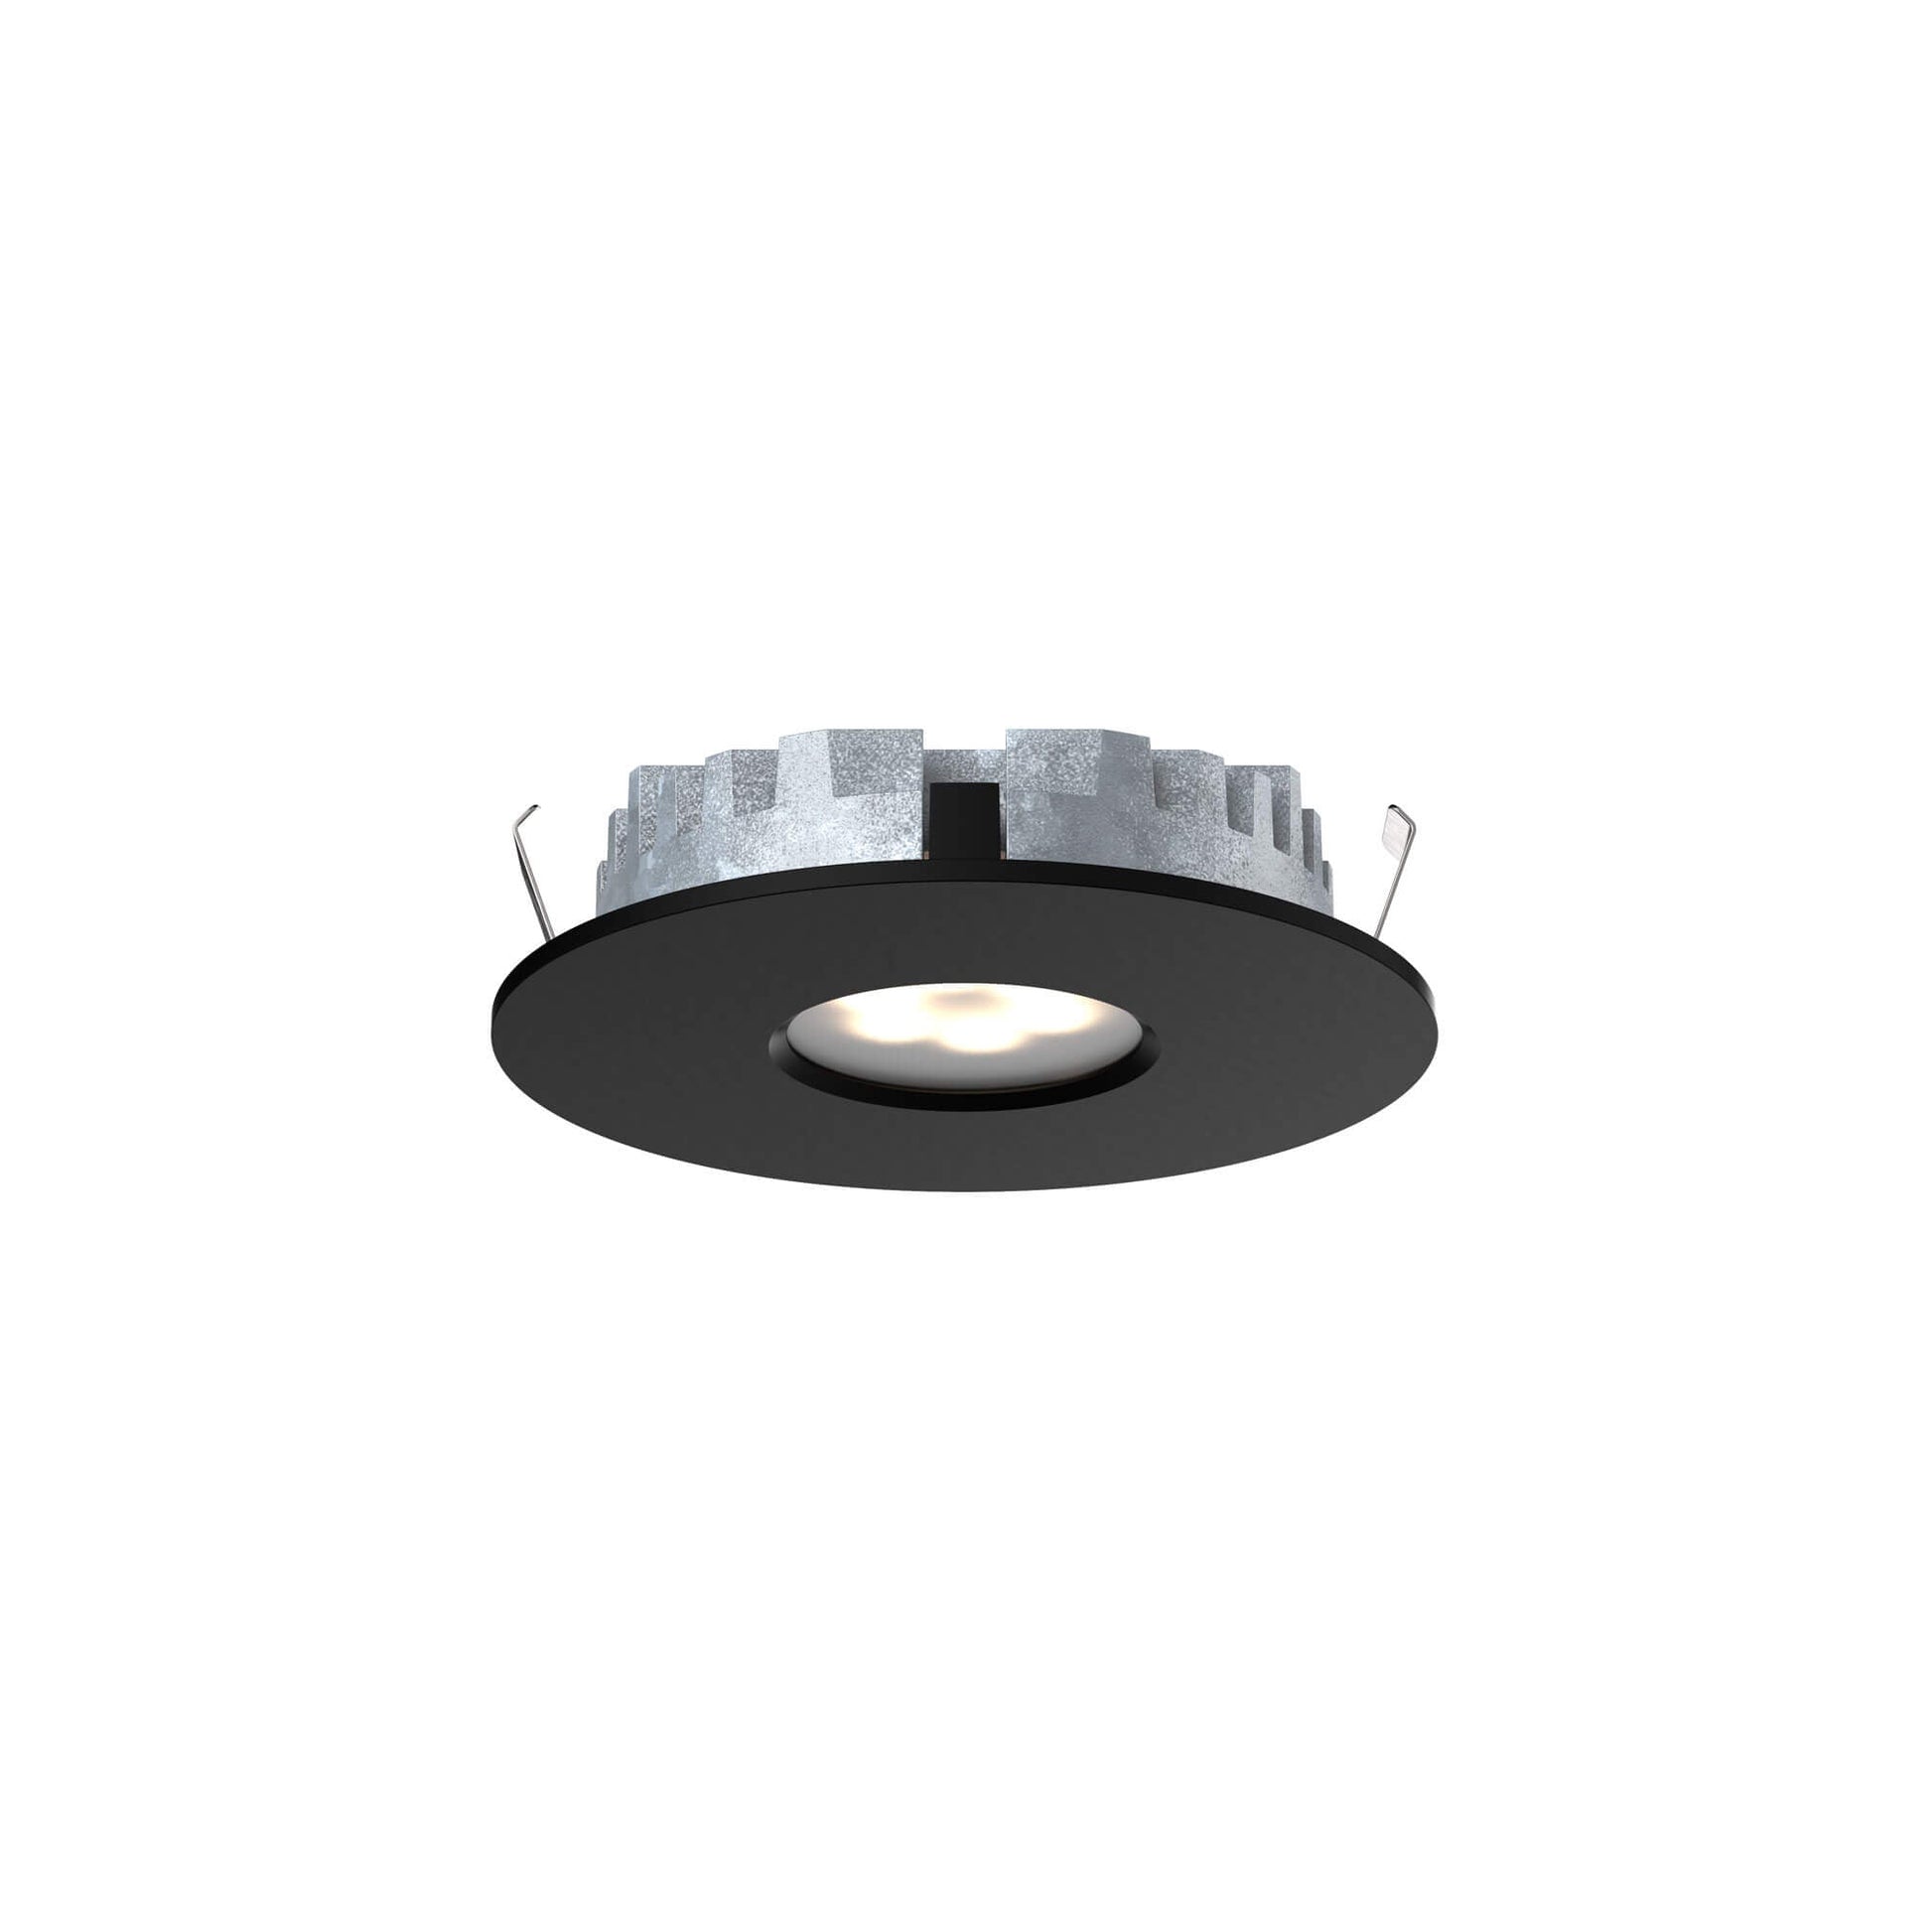 DALS-4001-CC-BKDals Lighting 4001-CC 3W 12V LED Puck Light Selectable CCT